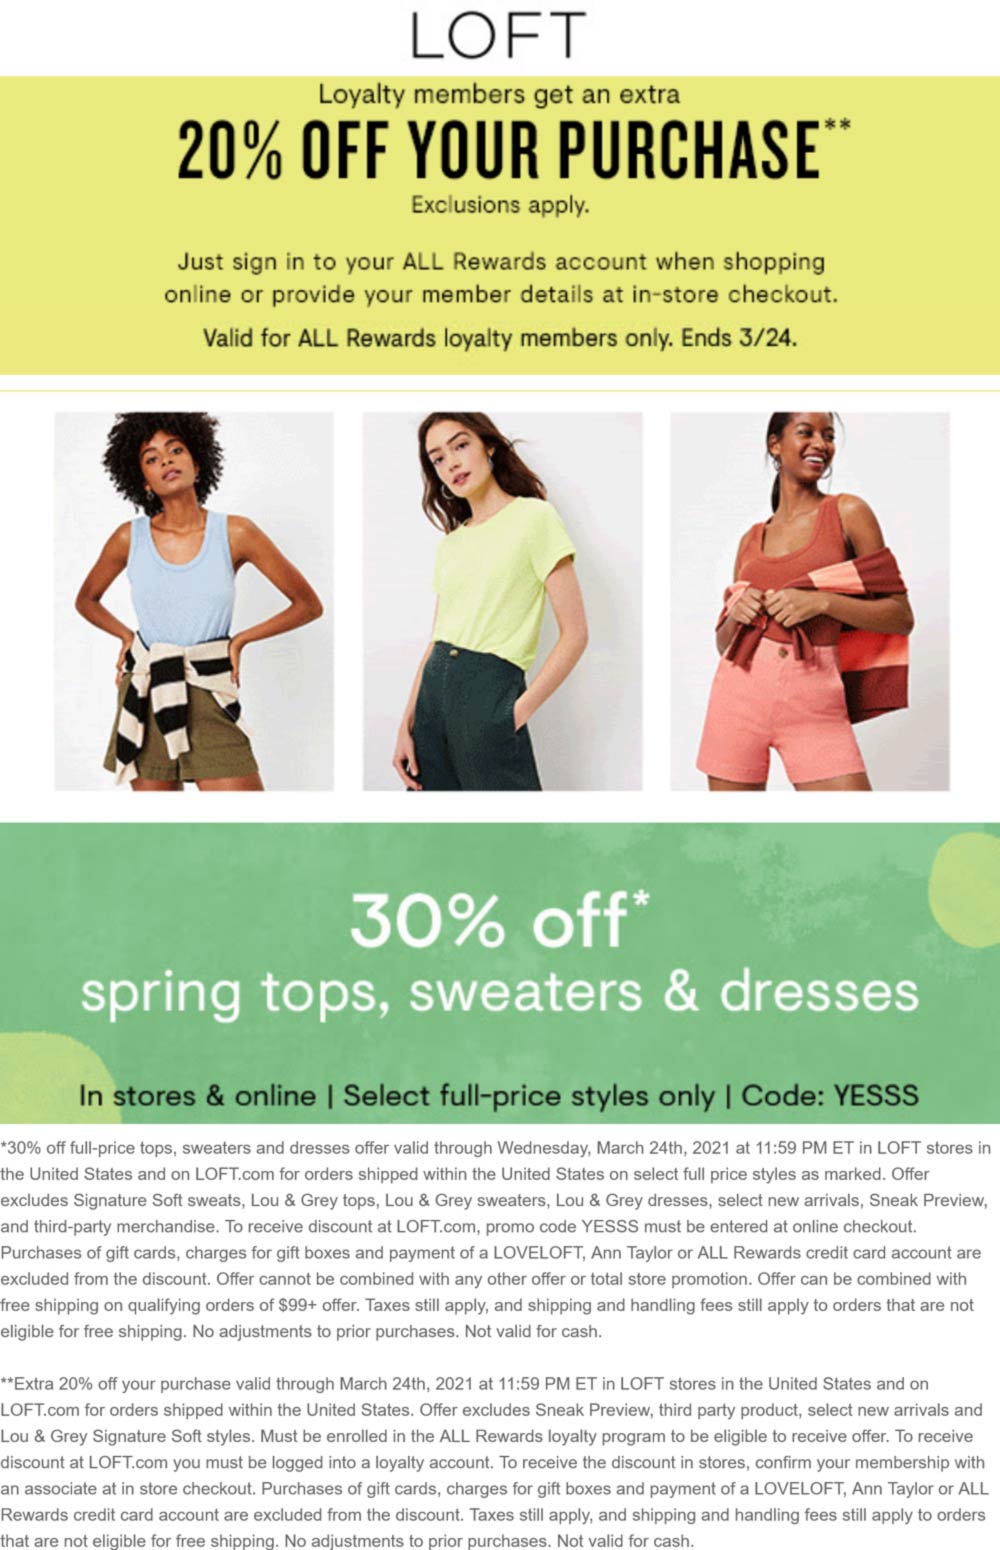 30-off-spring-tops-sweaters-at-loft-or-online-via-promo-code-yesss